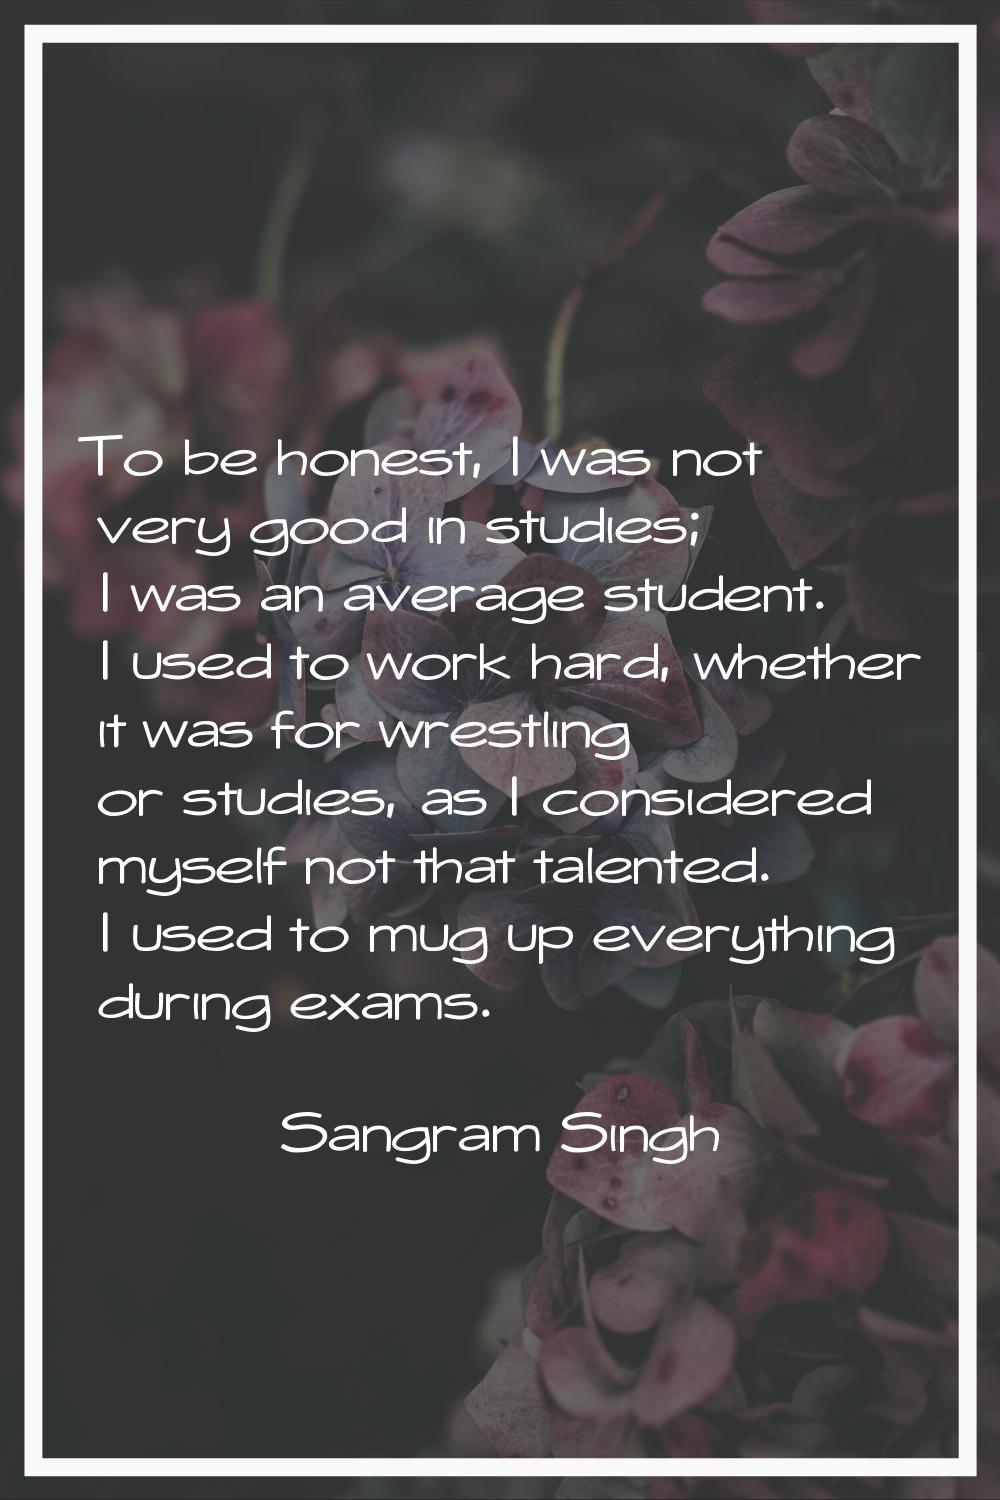 To be honest, I was not very good in studies; I was an average student. I used to work hard, whethe